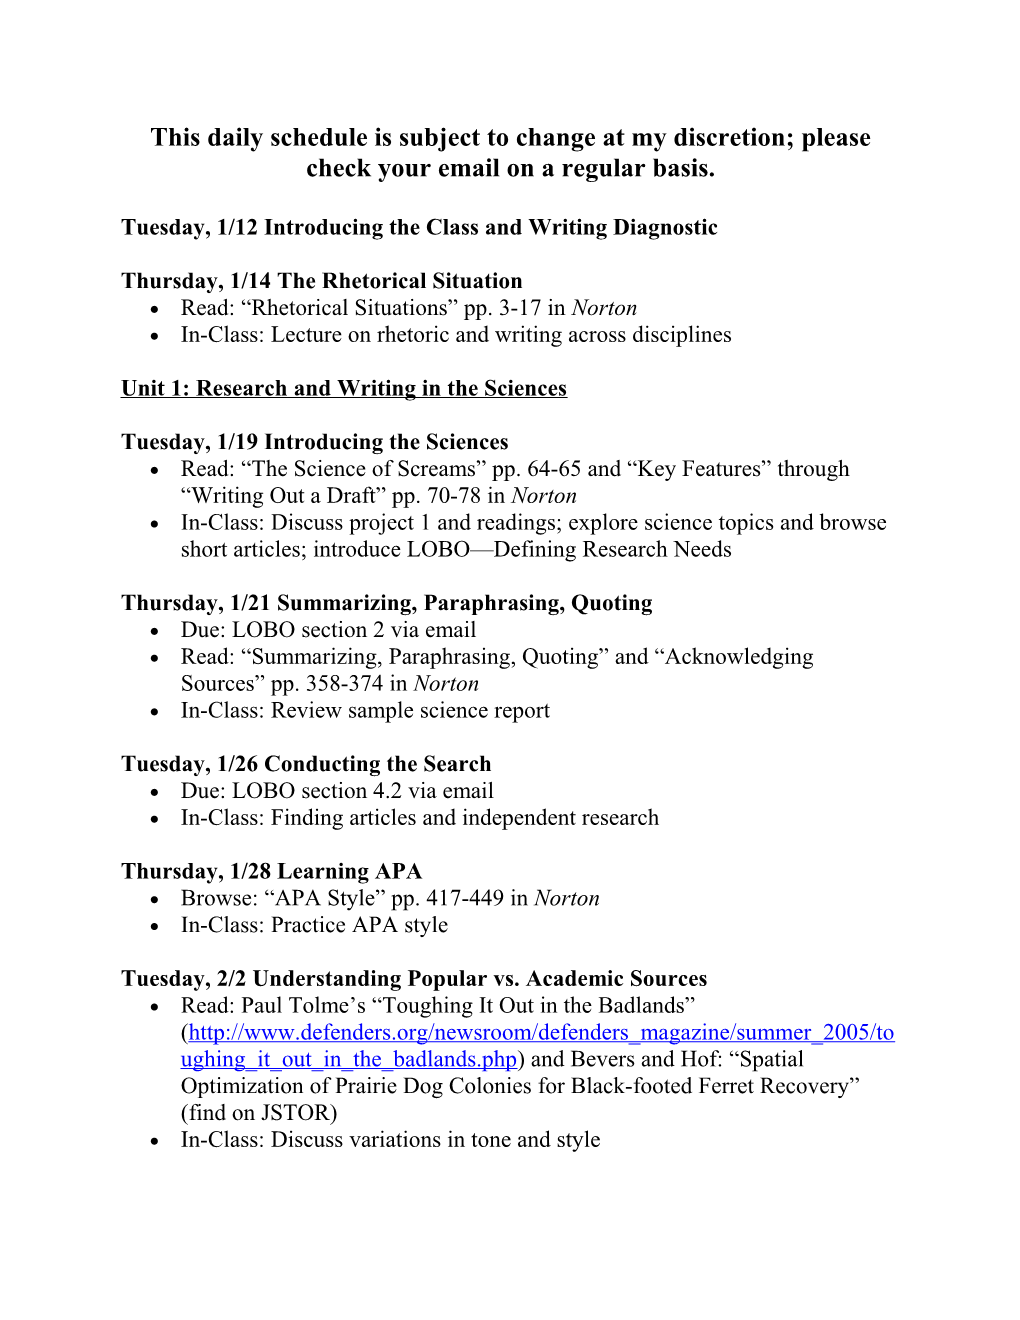 Monday, 1/11 Introducing the Class and Writing Diagnostic